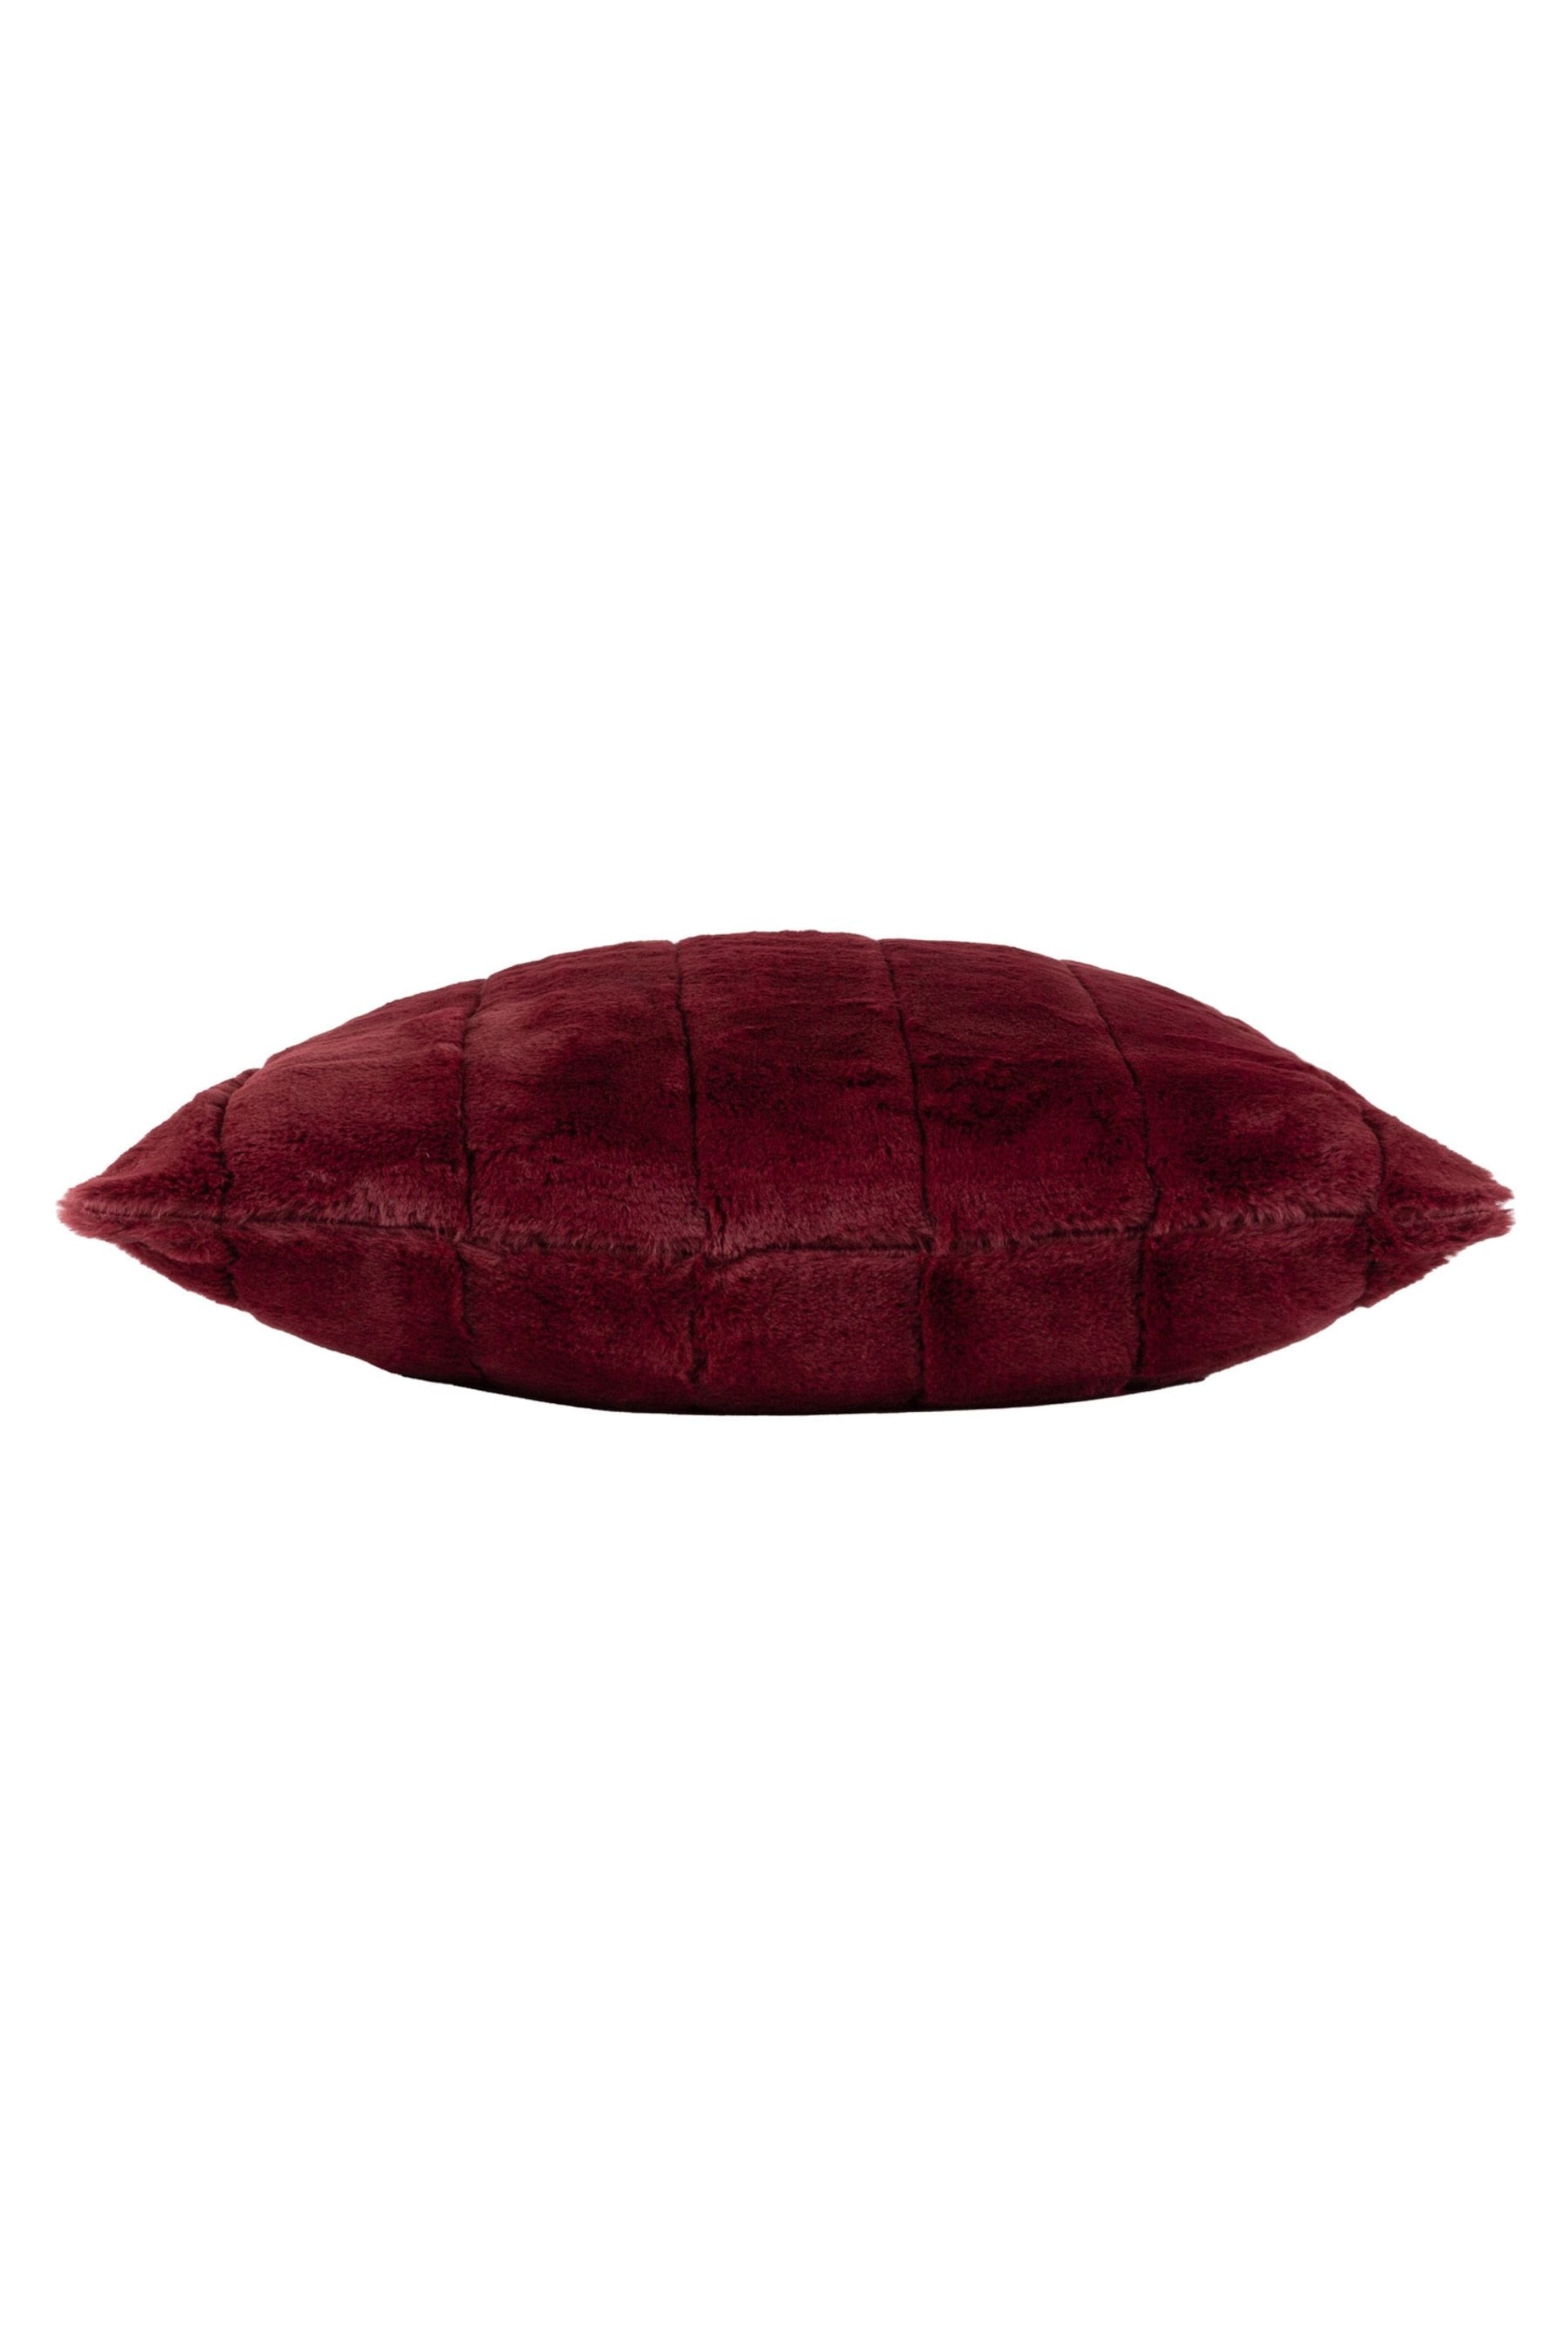 Riva Paoletti Red Empress Large Alpine Faux Fur Cushion - Image 2 of 6